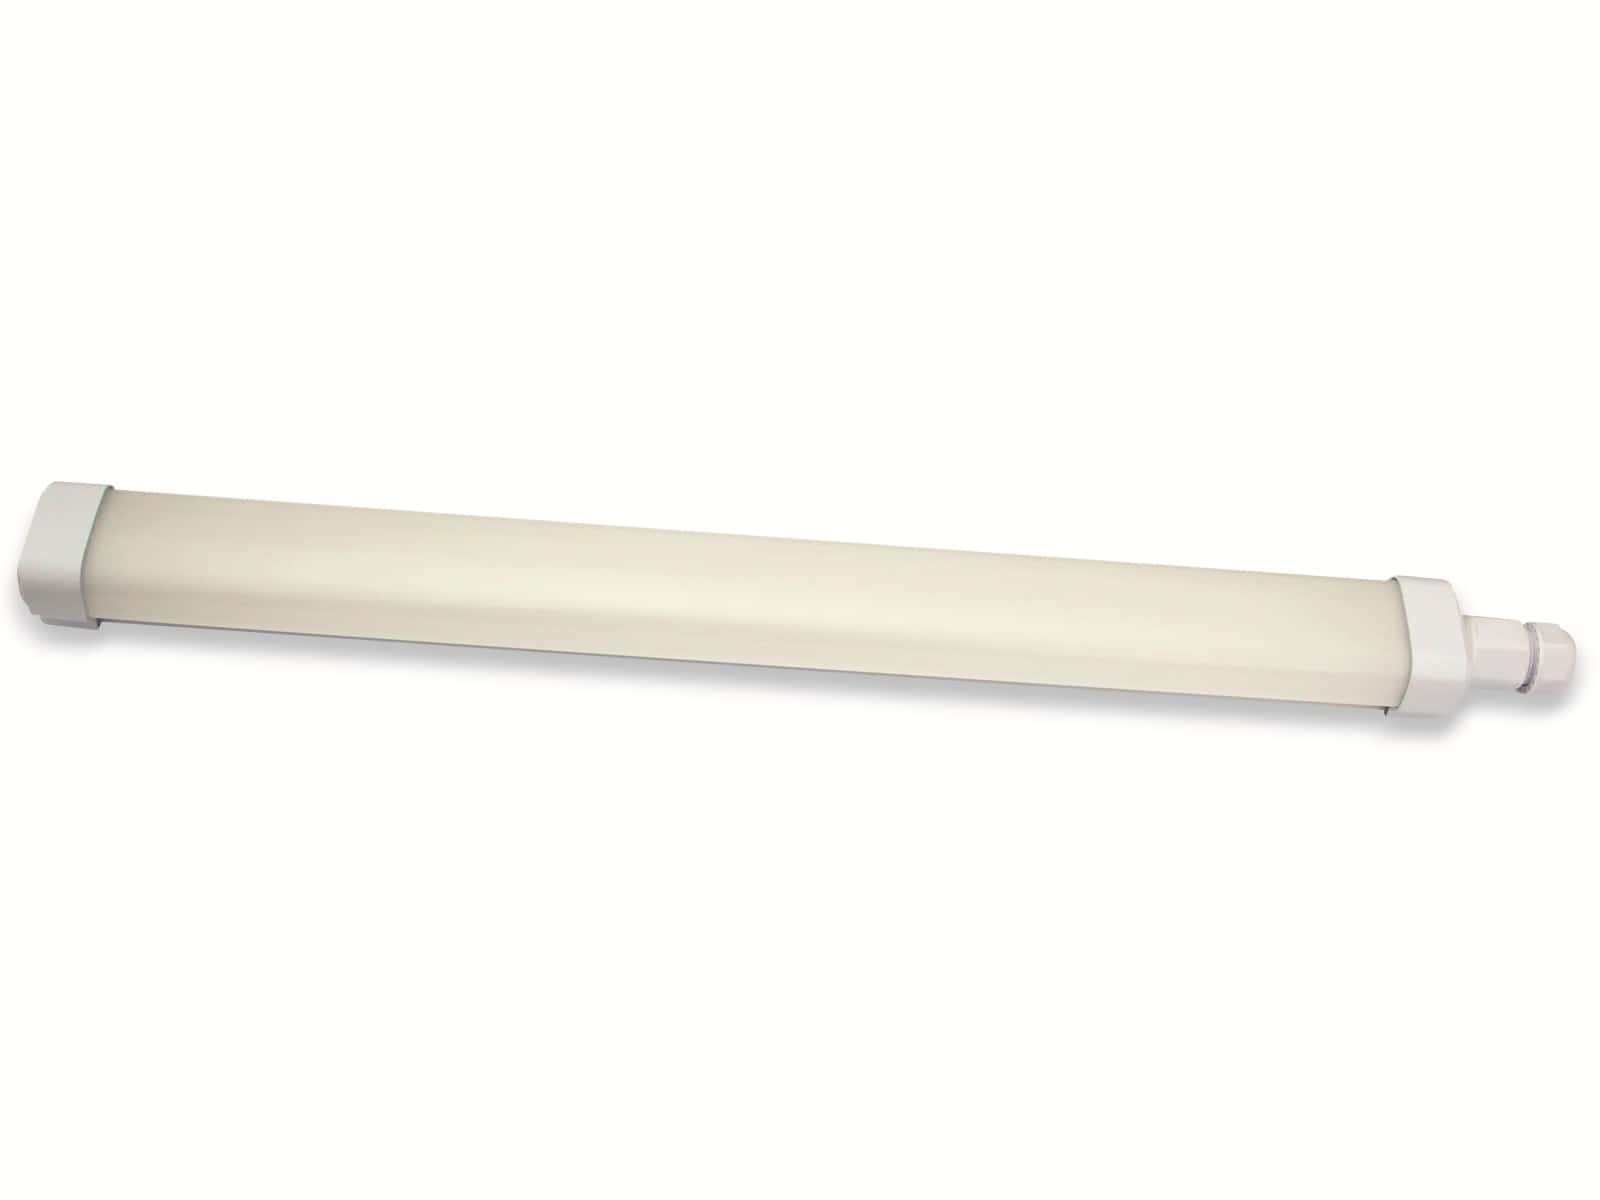 BLULAXA LED-Feuchtraum-Wannenleuchte, HumiLED, 10 W, 1200 lm, 4000 K, 600 mm